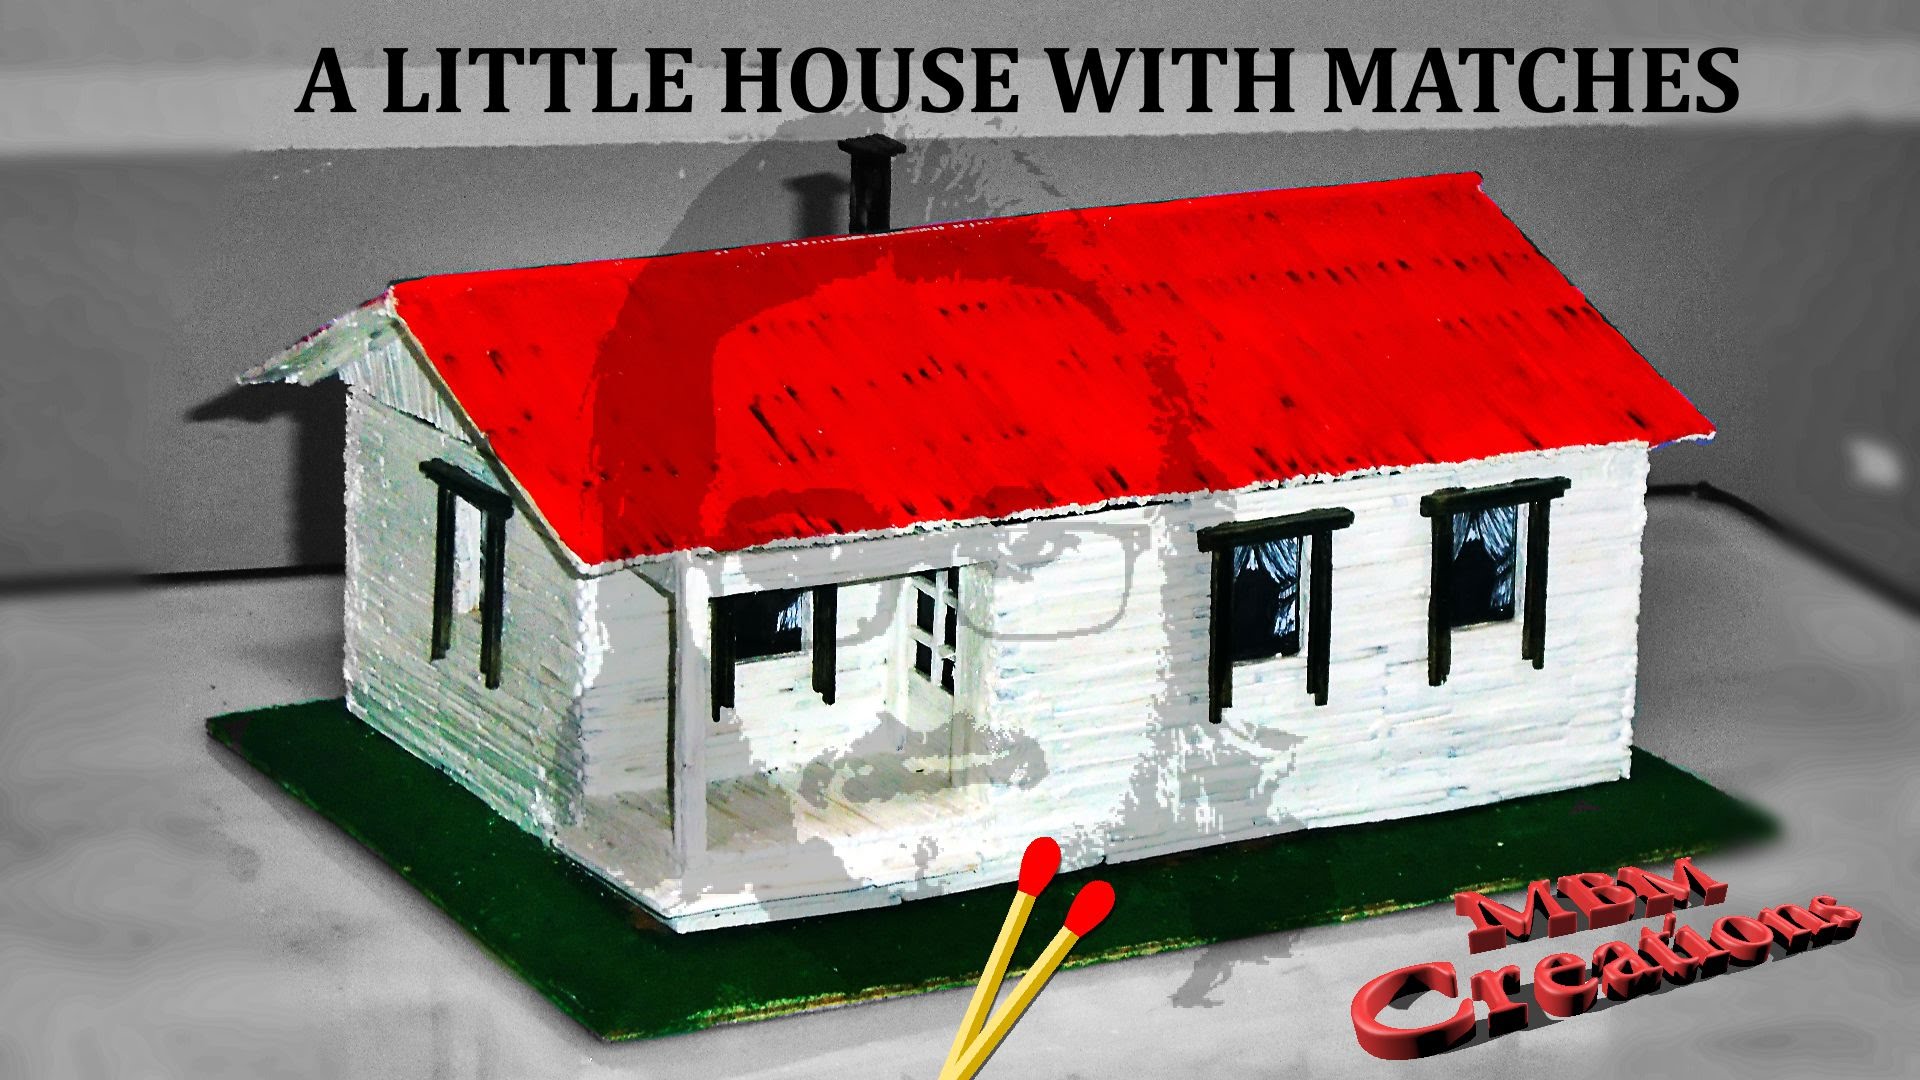 MBM Creations - How to build a little house with matches - YouTube